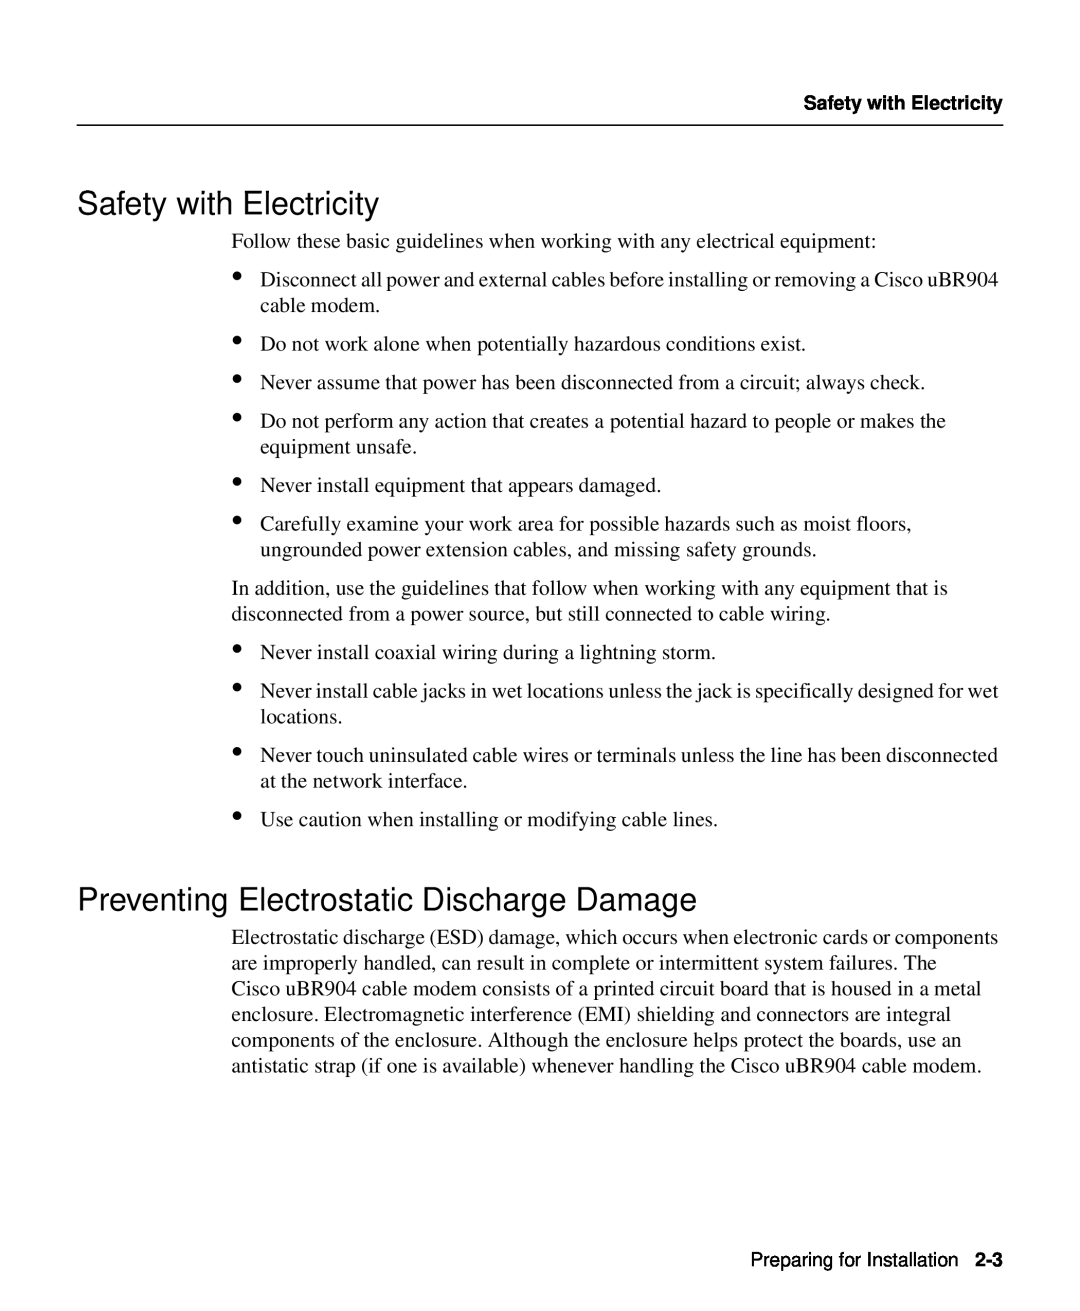 Cisco Systems UBR904 manual Safety with Electricity, Preventing Electrostatic Discharge Damage 